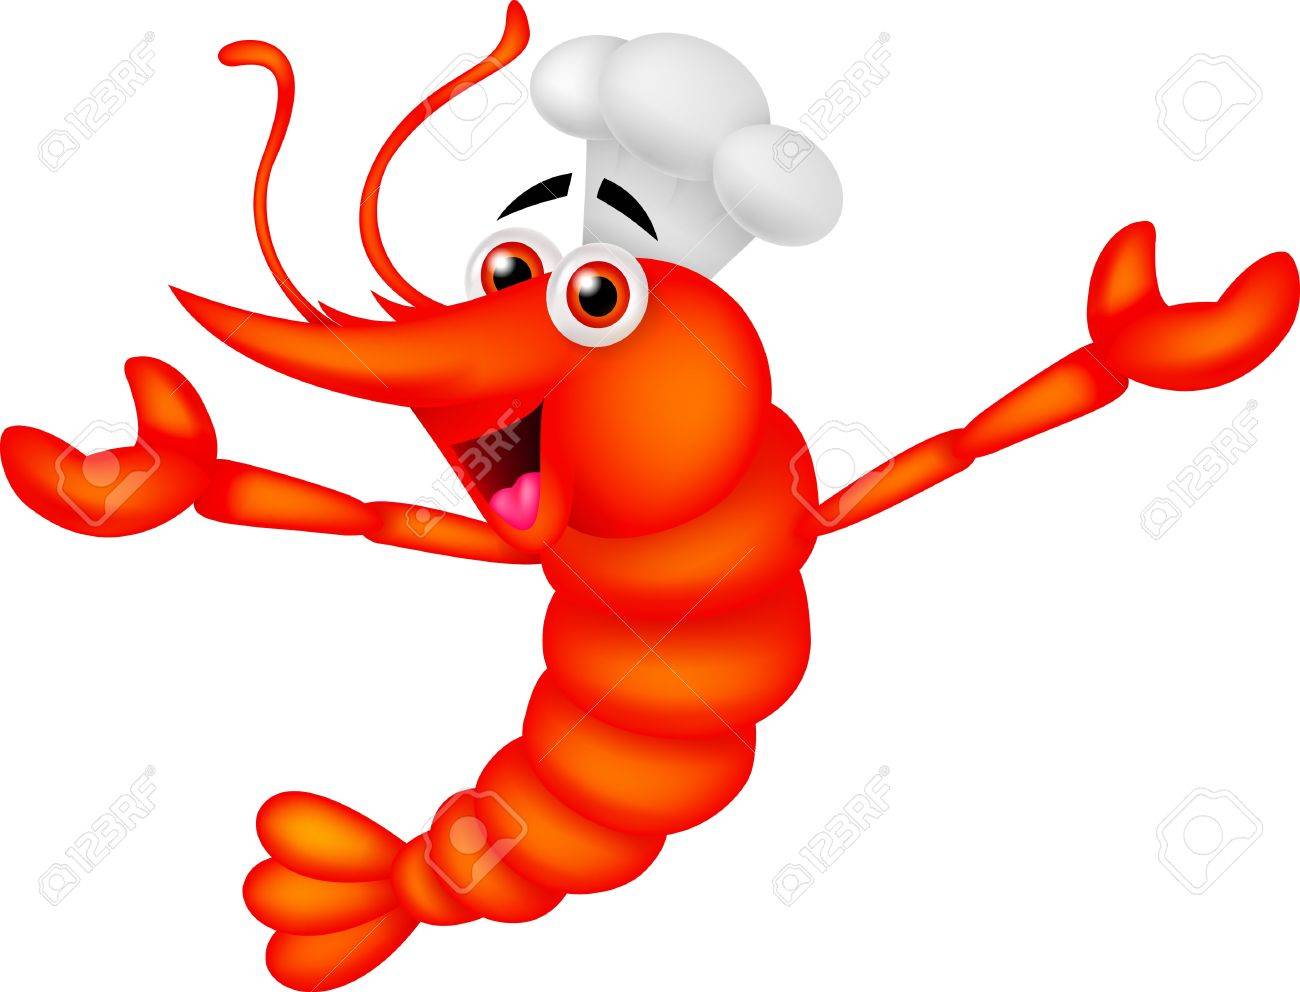 Lobster Clipart Images